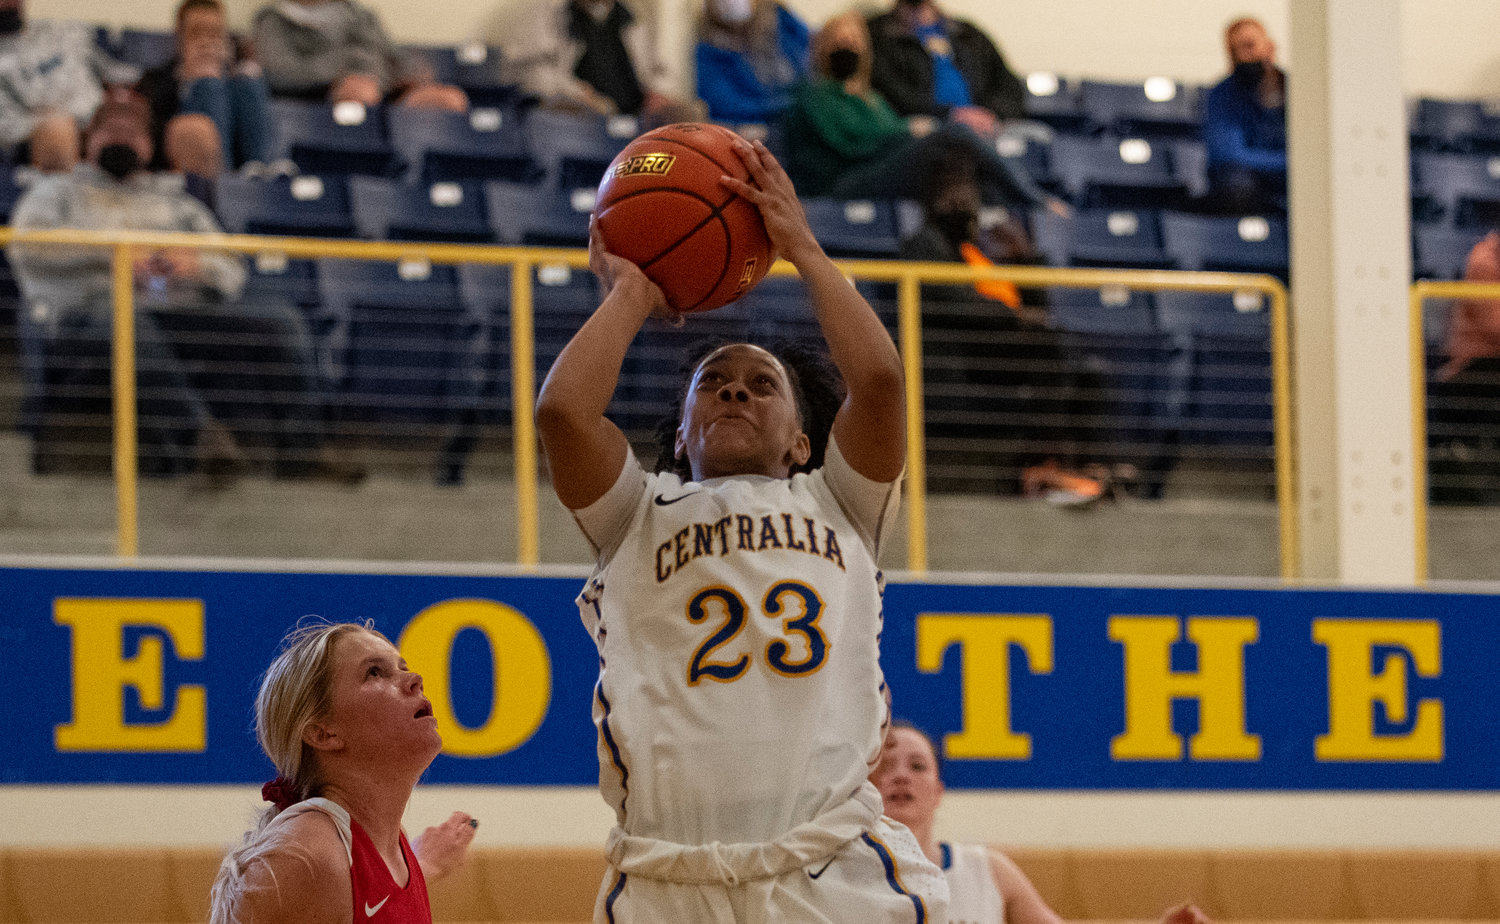 Centralia College point guard Najahia Forks (23) drops in a layup against Lower Columbia College at home on Friday.